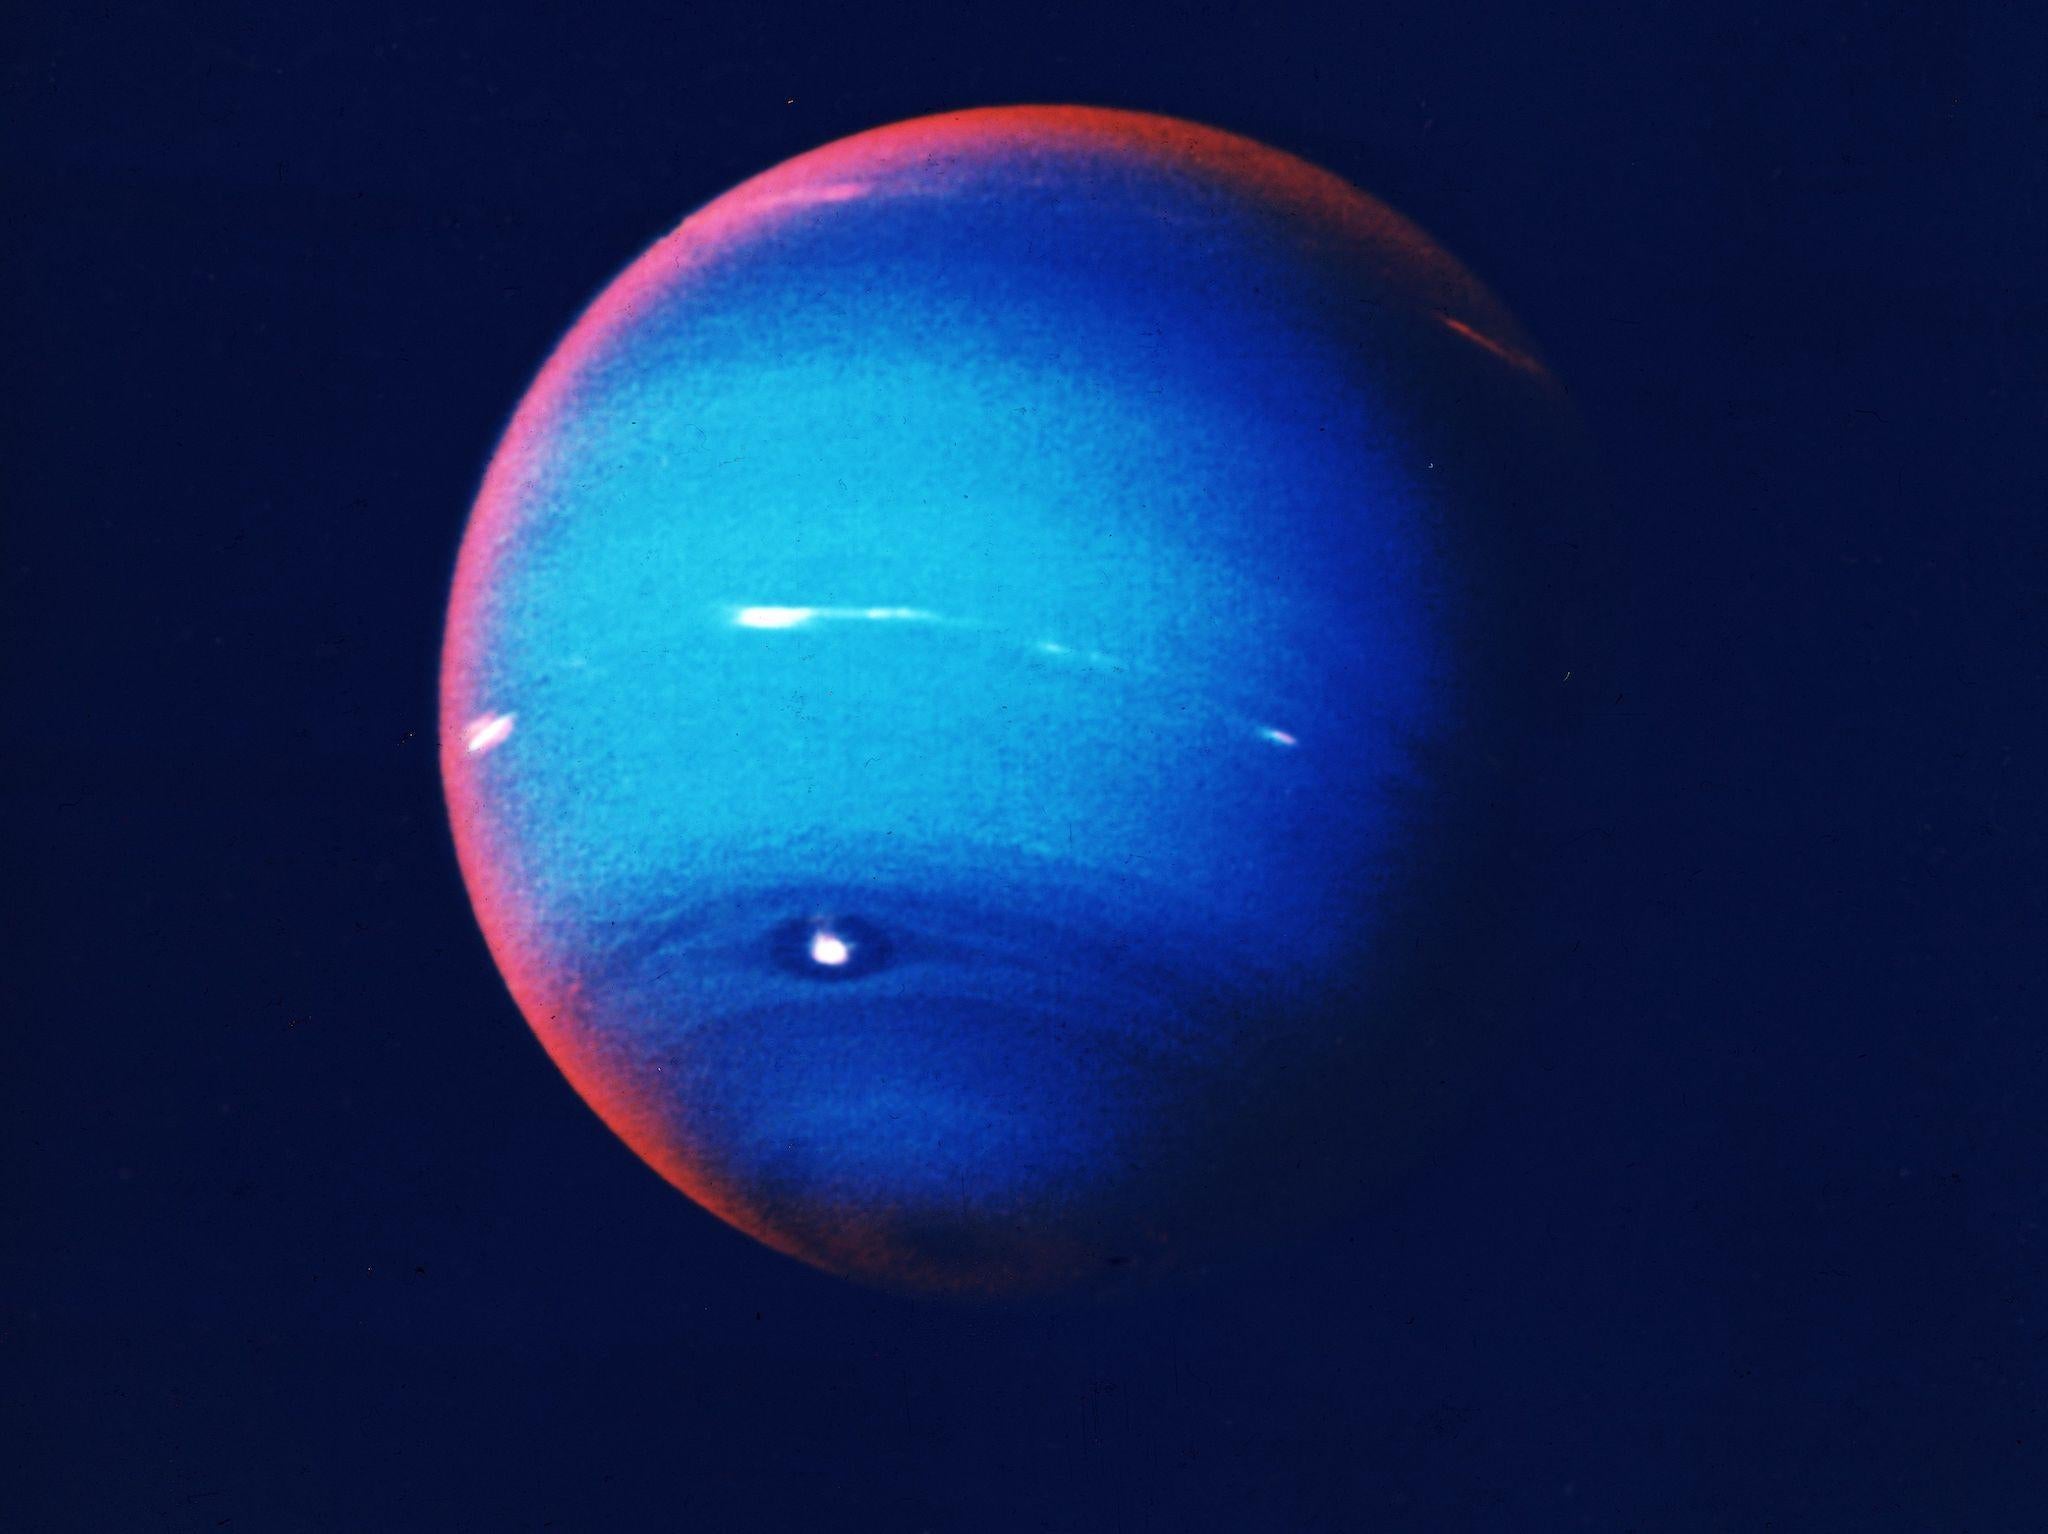 Scientists find whole new planet like our Neptune, potentially